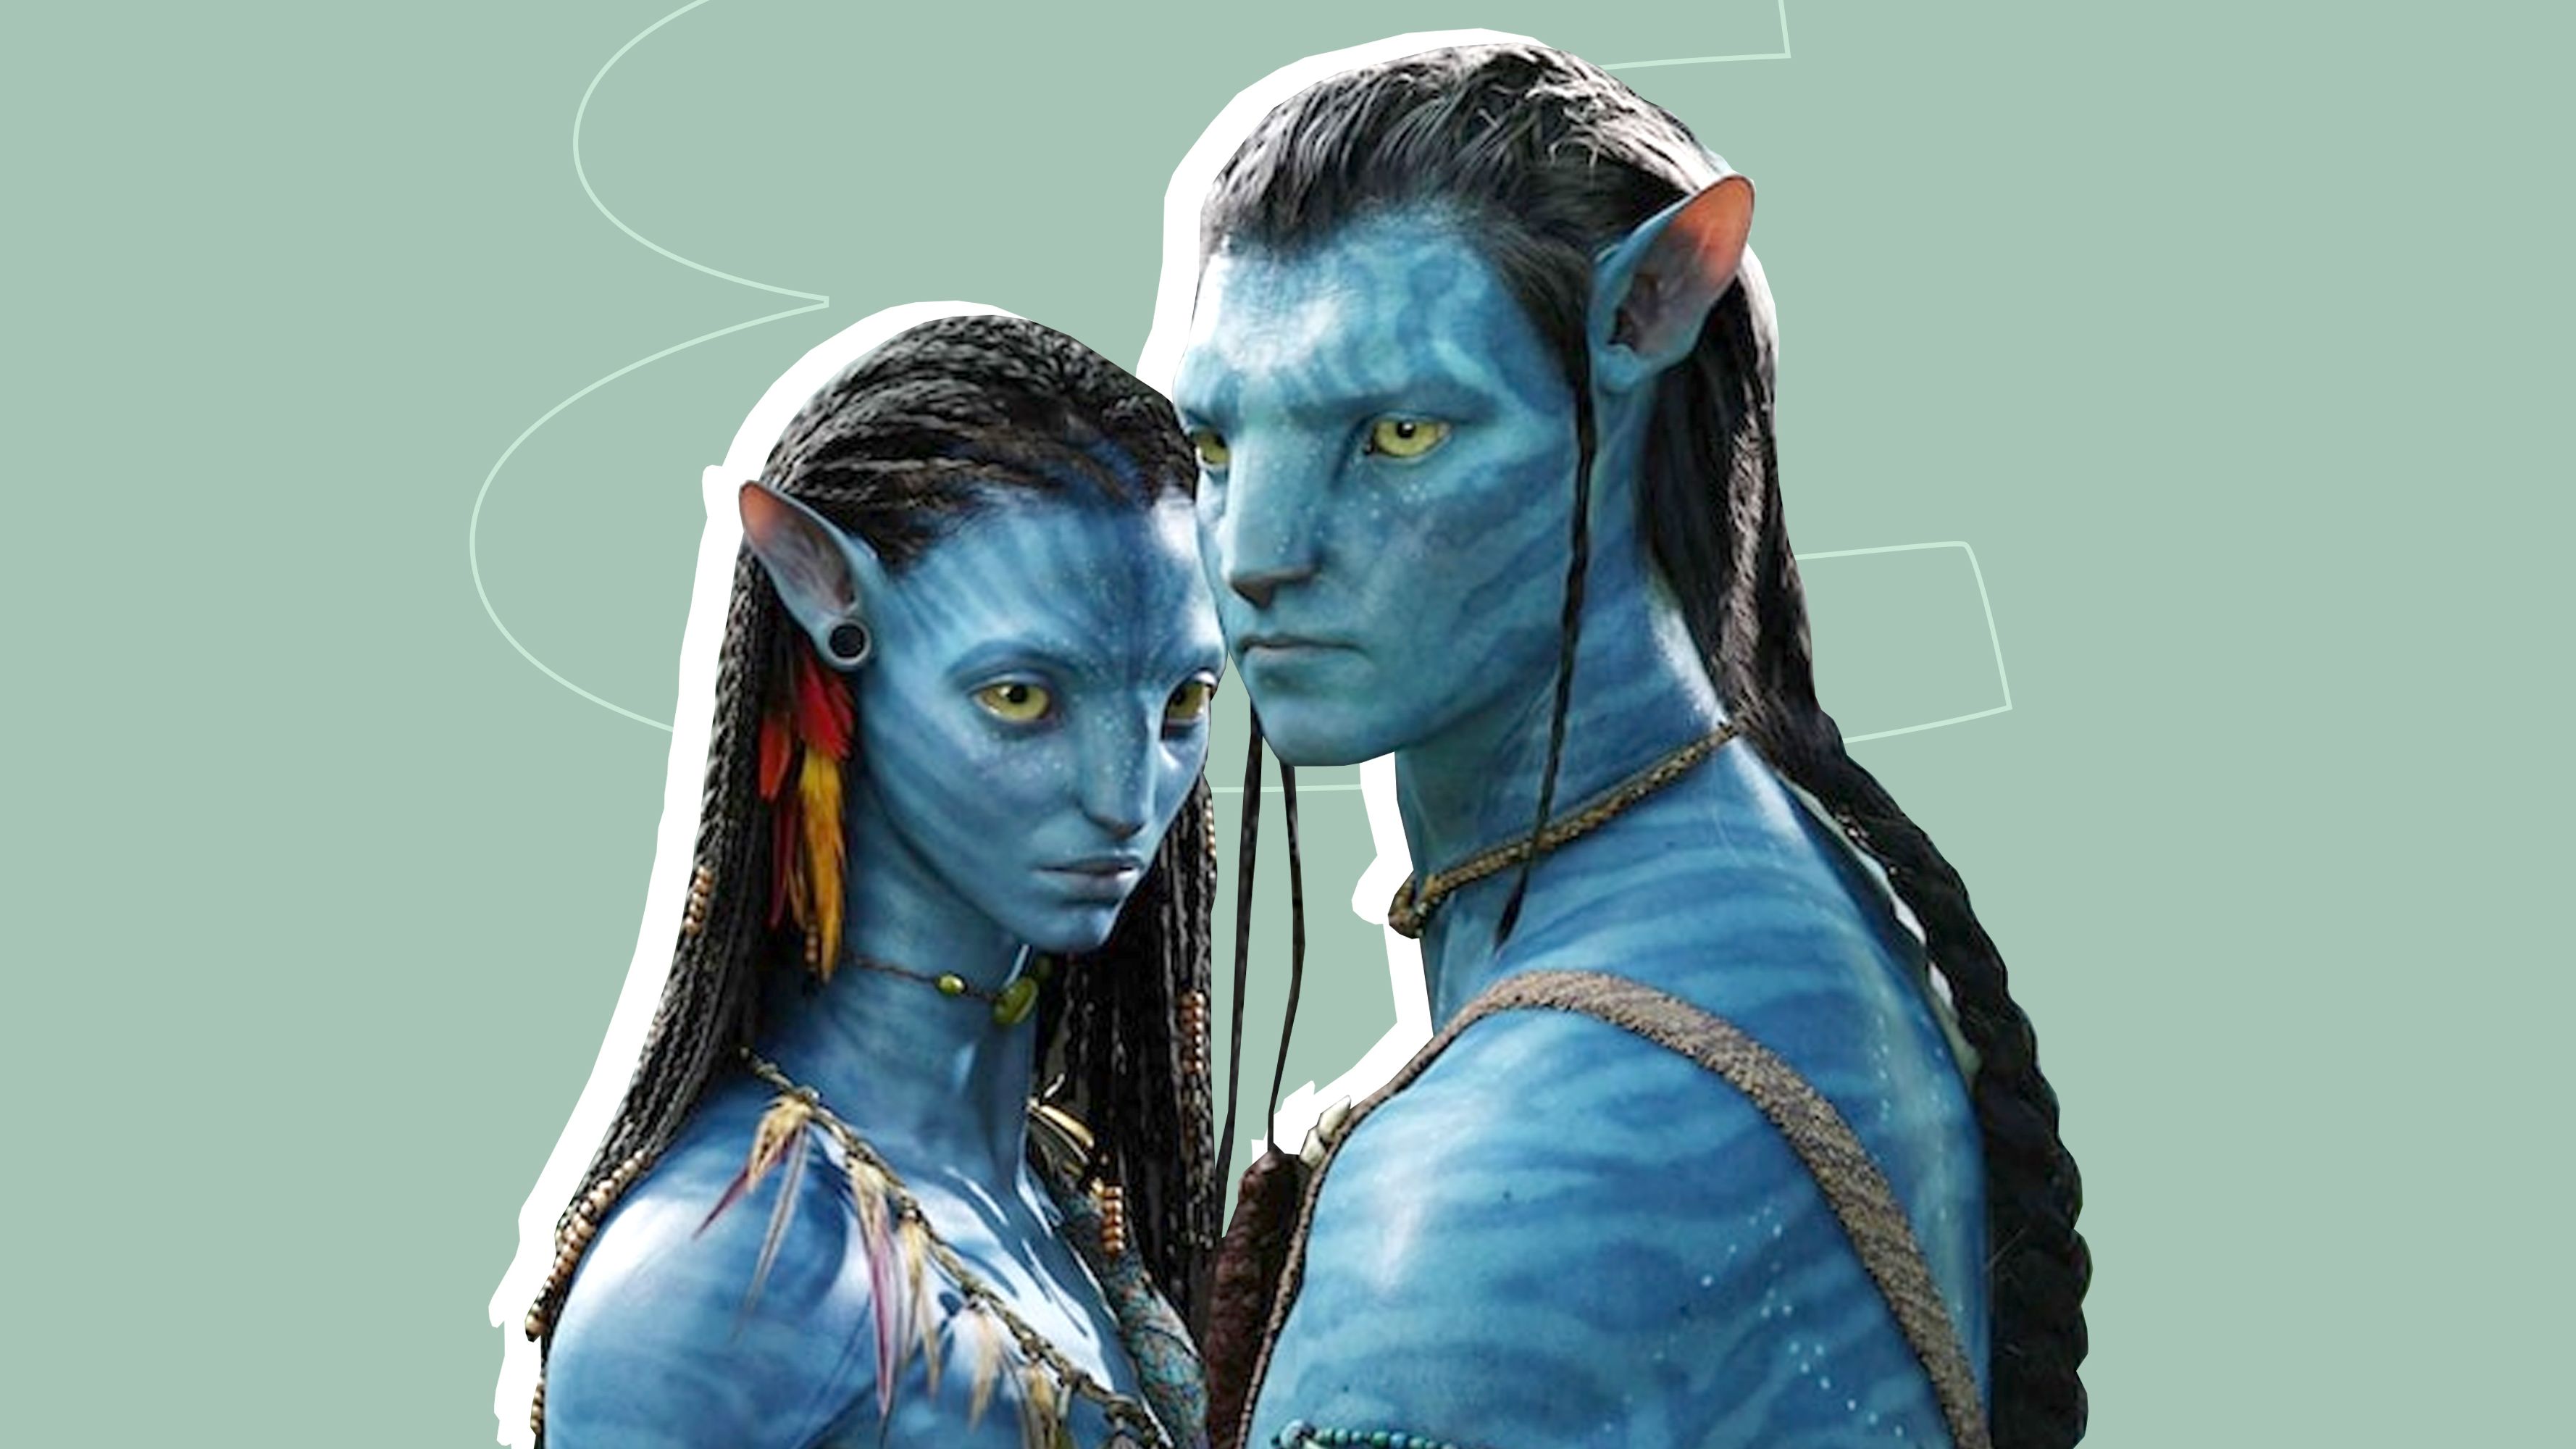 Avatar: The Way of Water” and the future of filmmaking